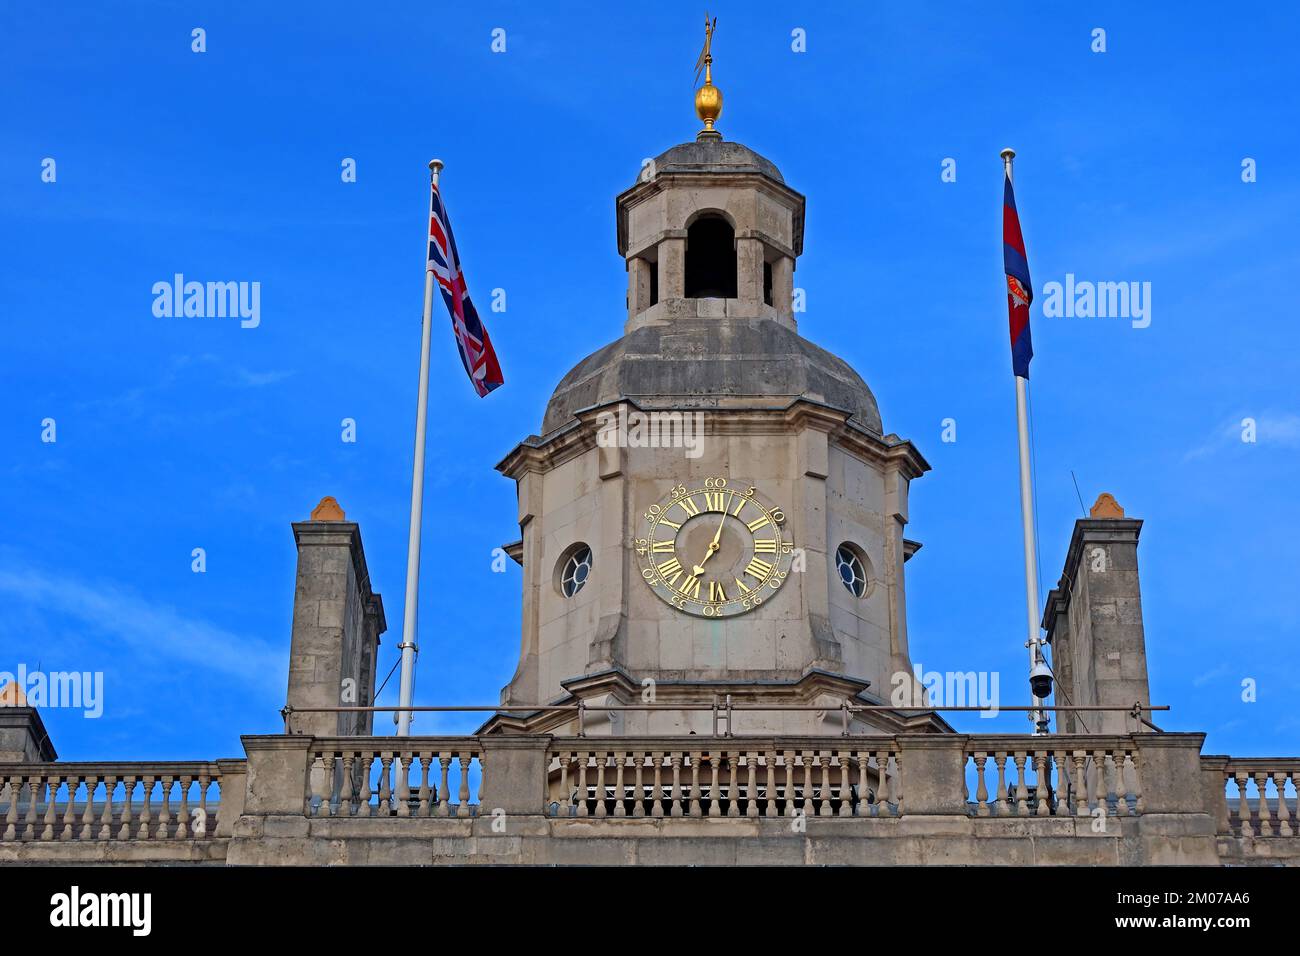 Horseguards Parade, Whitehall - Horse Guards Rd, Whitehall, London , England, Großbritannien, SW1A 2BE Stockfoto